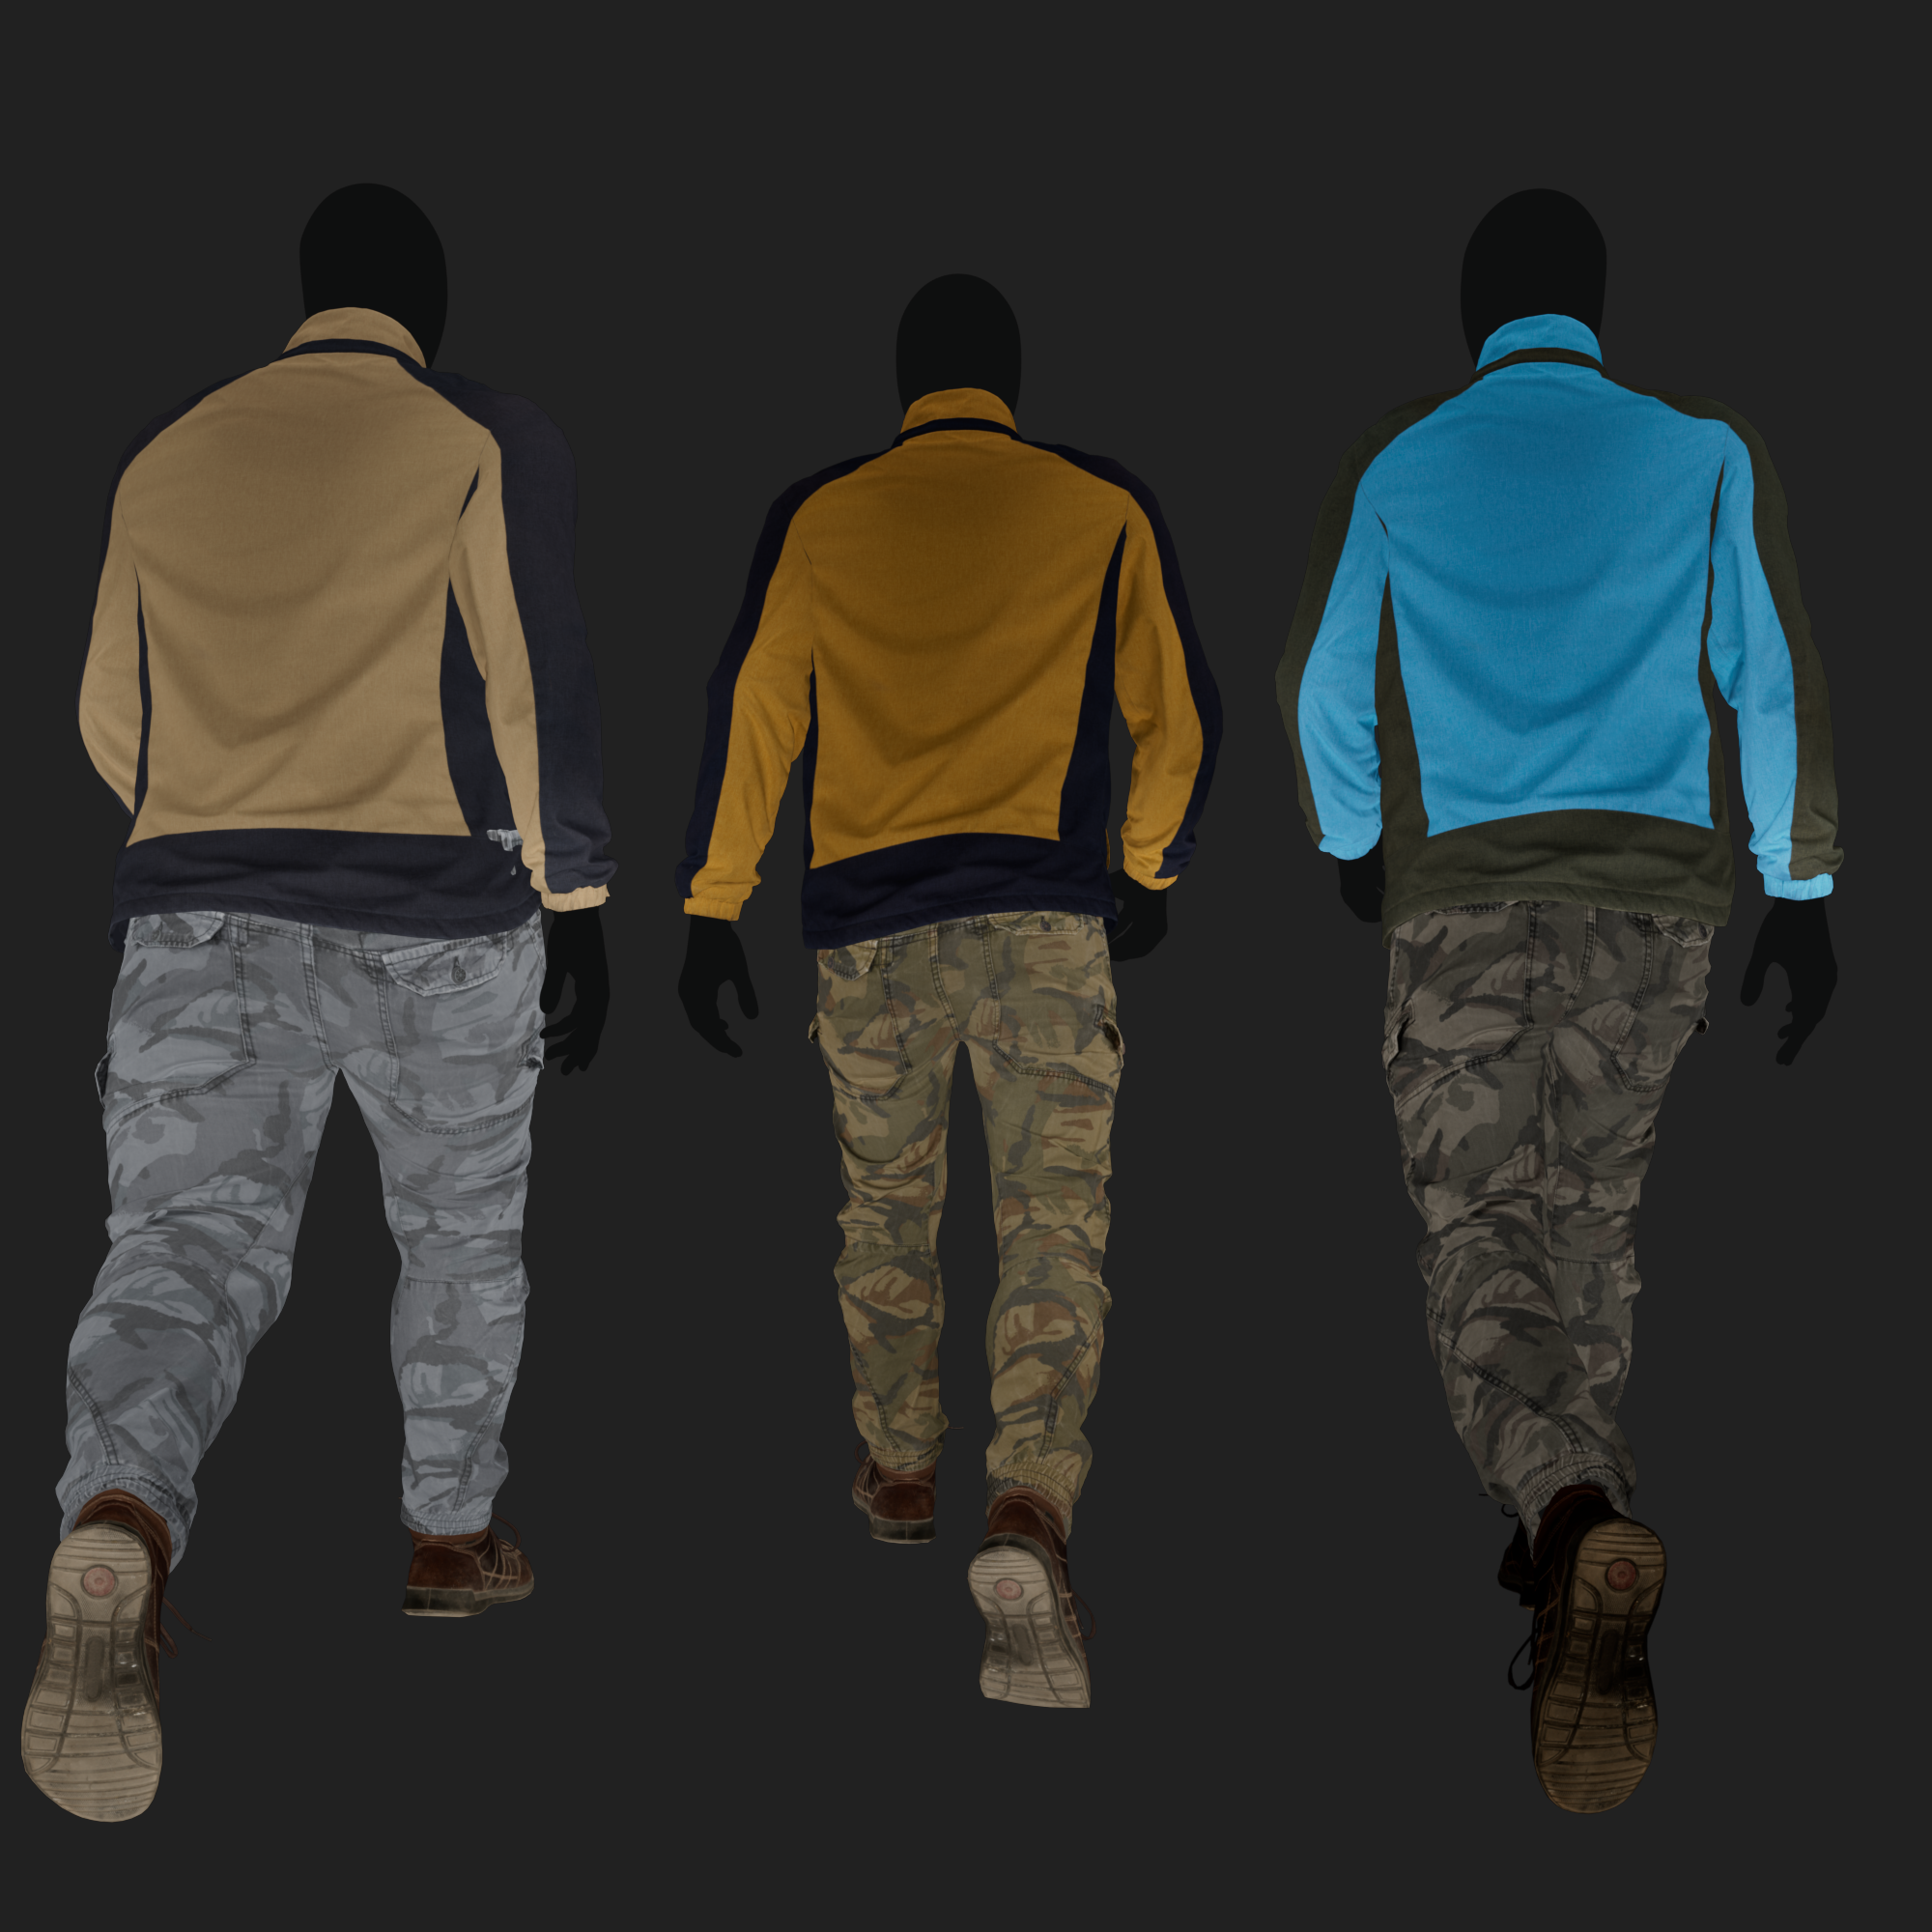 Albedo (Diffuse) map rendering of a 3D model of an animated walking male character dressed in: Sport Jacket, Combat Trousers, Shoes - back view